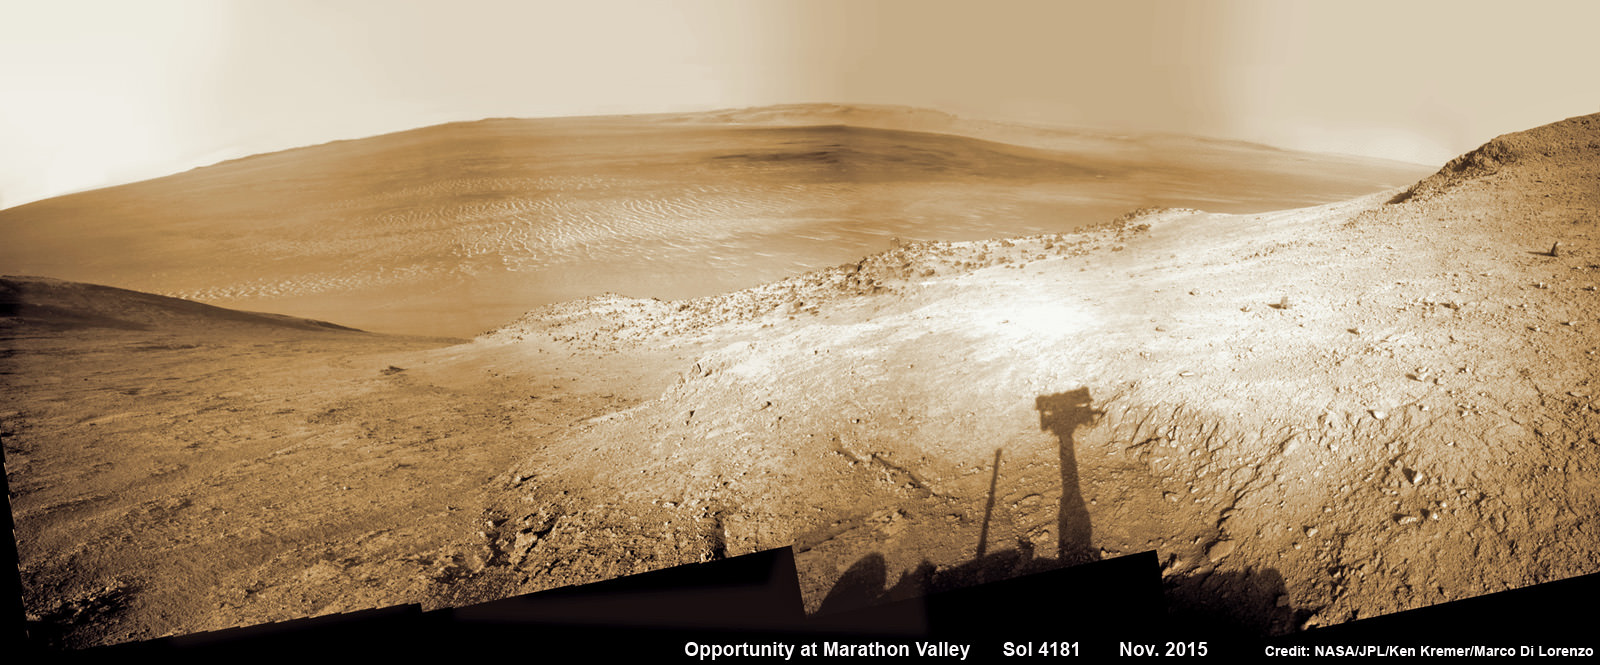 NASA’s Opportunity rover peers outwards across to the vast expense of Endeavour Crater from current location descending along steep walled Marathon Valley in early November 2015. Marathon Valley holds significant deposits of water altered clay minerals holding clues to the planets watery past.  Shadow of Pancam Mast assembly and robots deck visible at right. This navcam camera photo mosaic was assembled from images taken on Sol 4181 (Oct. 29, 2015) and colorized.  Credit: NASA/JPL/Cornell/Ken Kremer/kenkremer.com/Marco Di Lorenzo